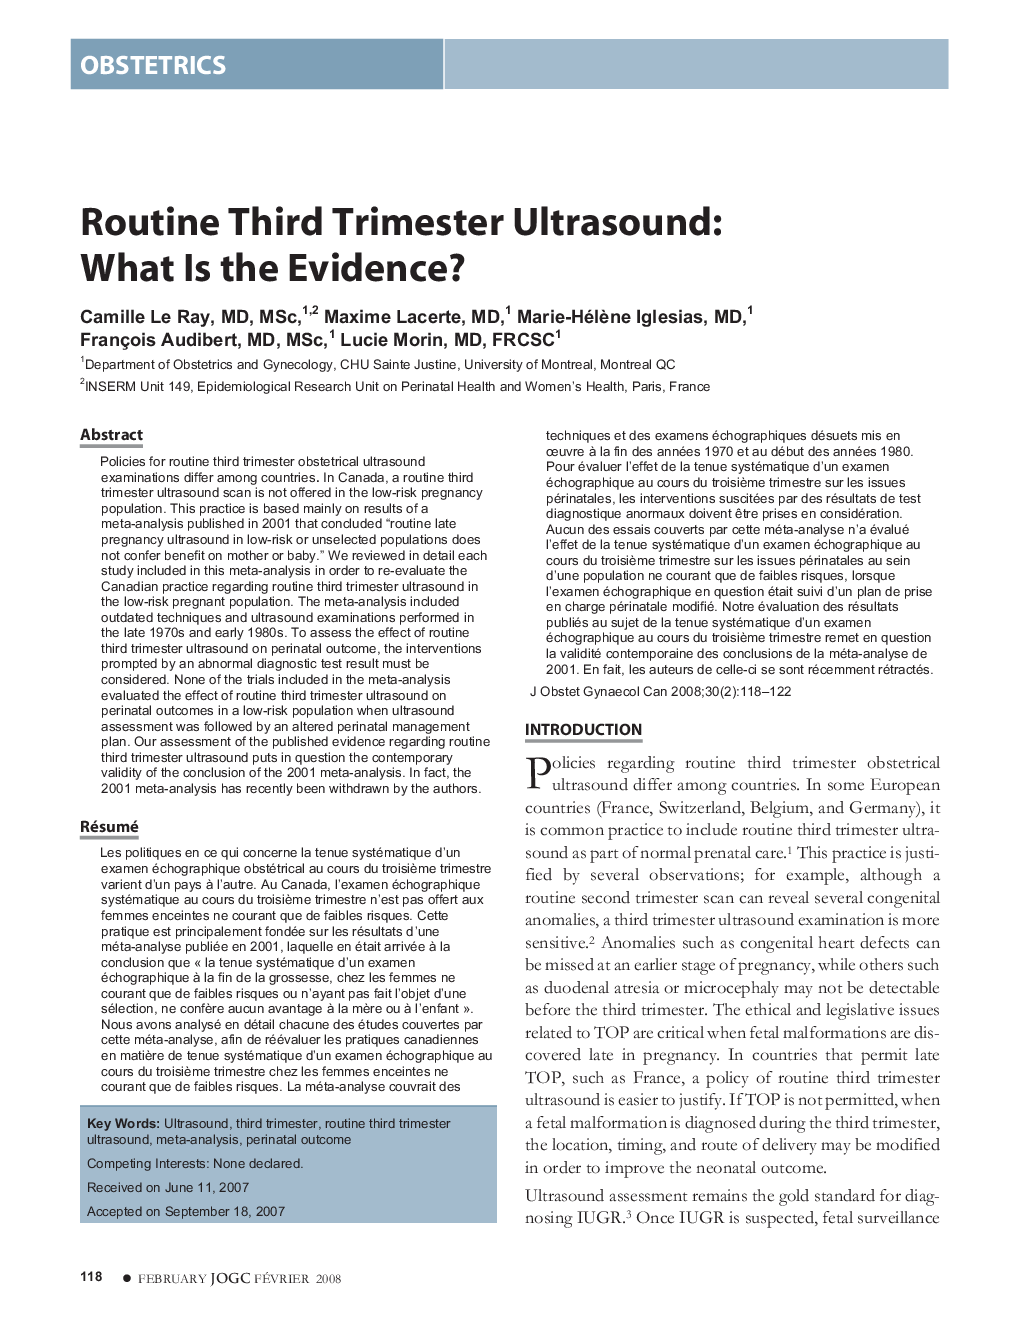 Routine Third Trimester Ultrasound: What Is the Evidence?